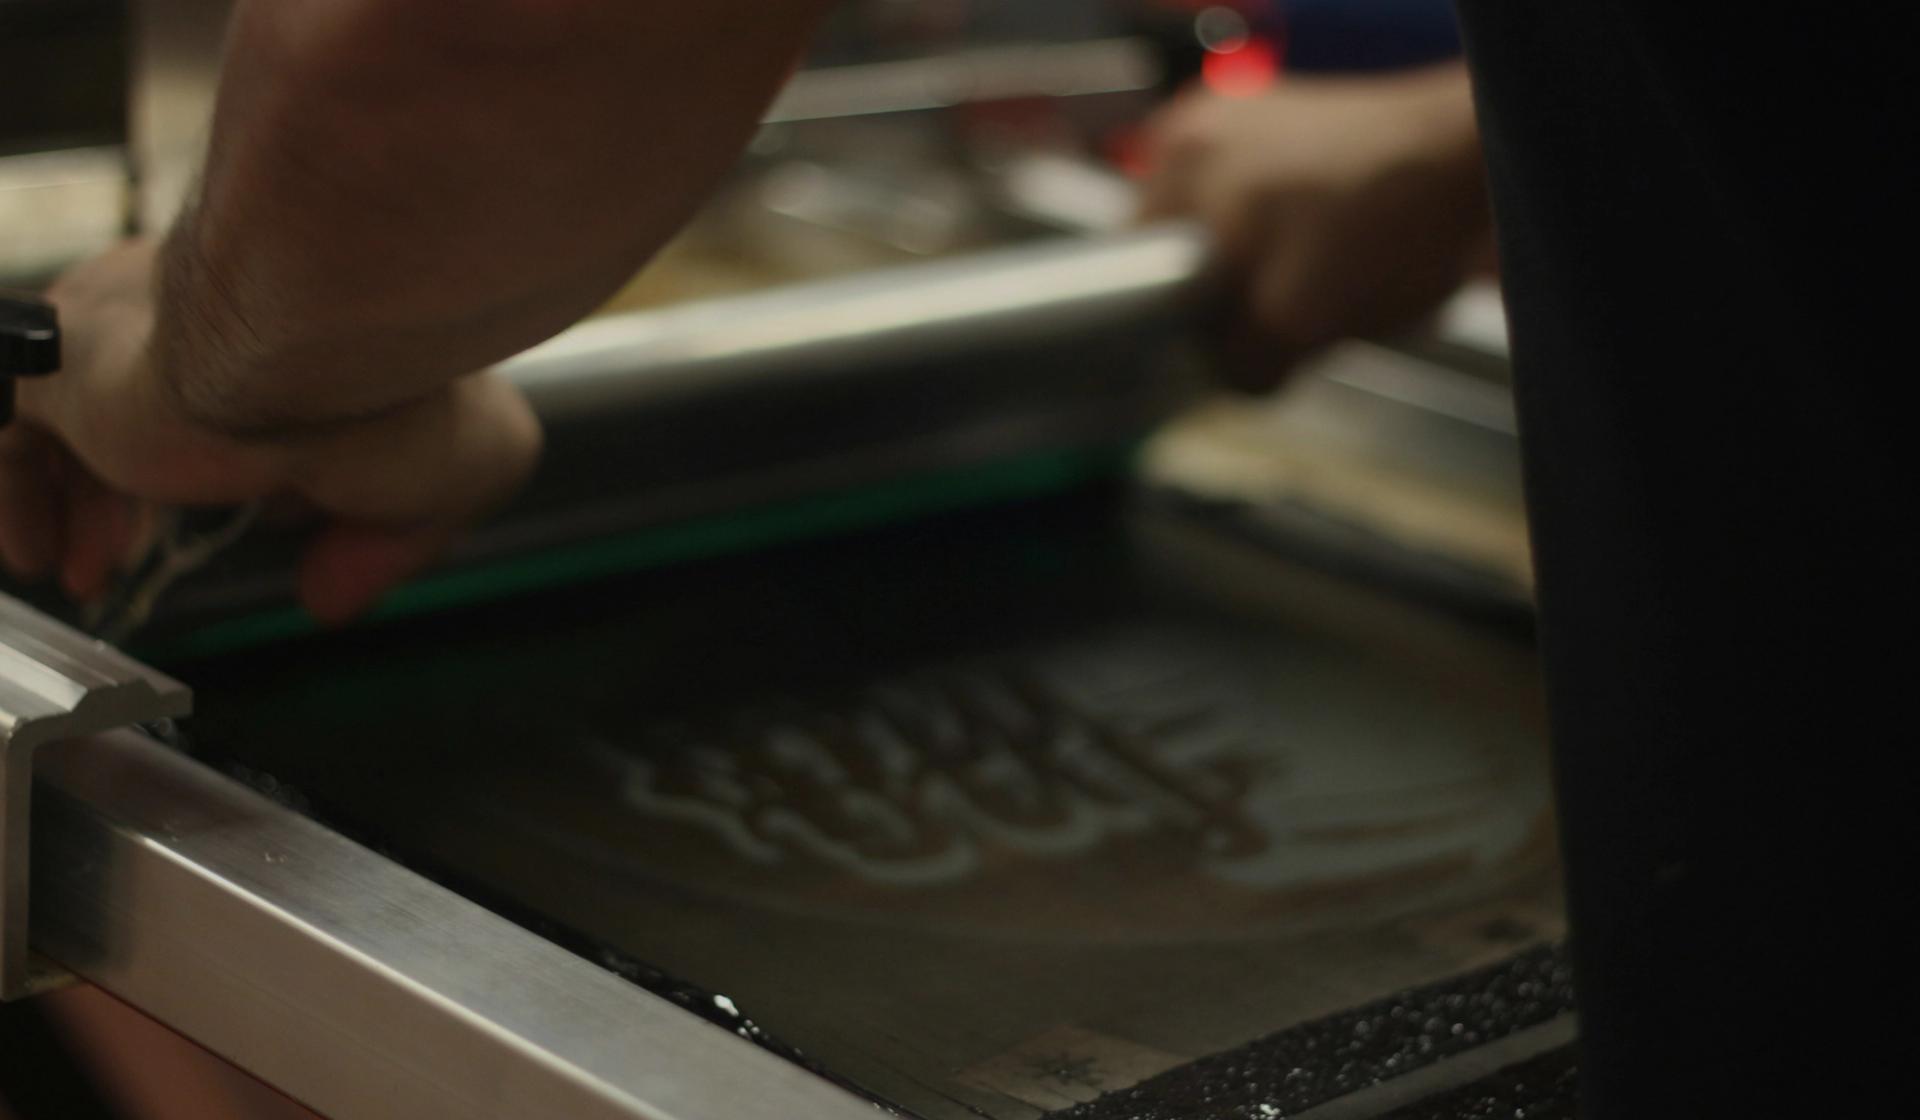 A screen print being made